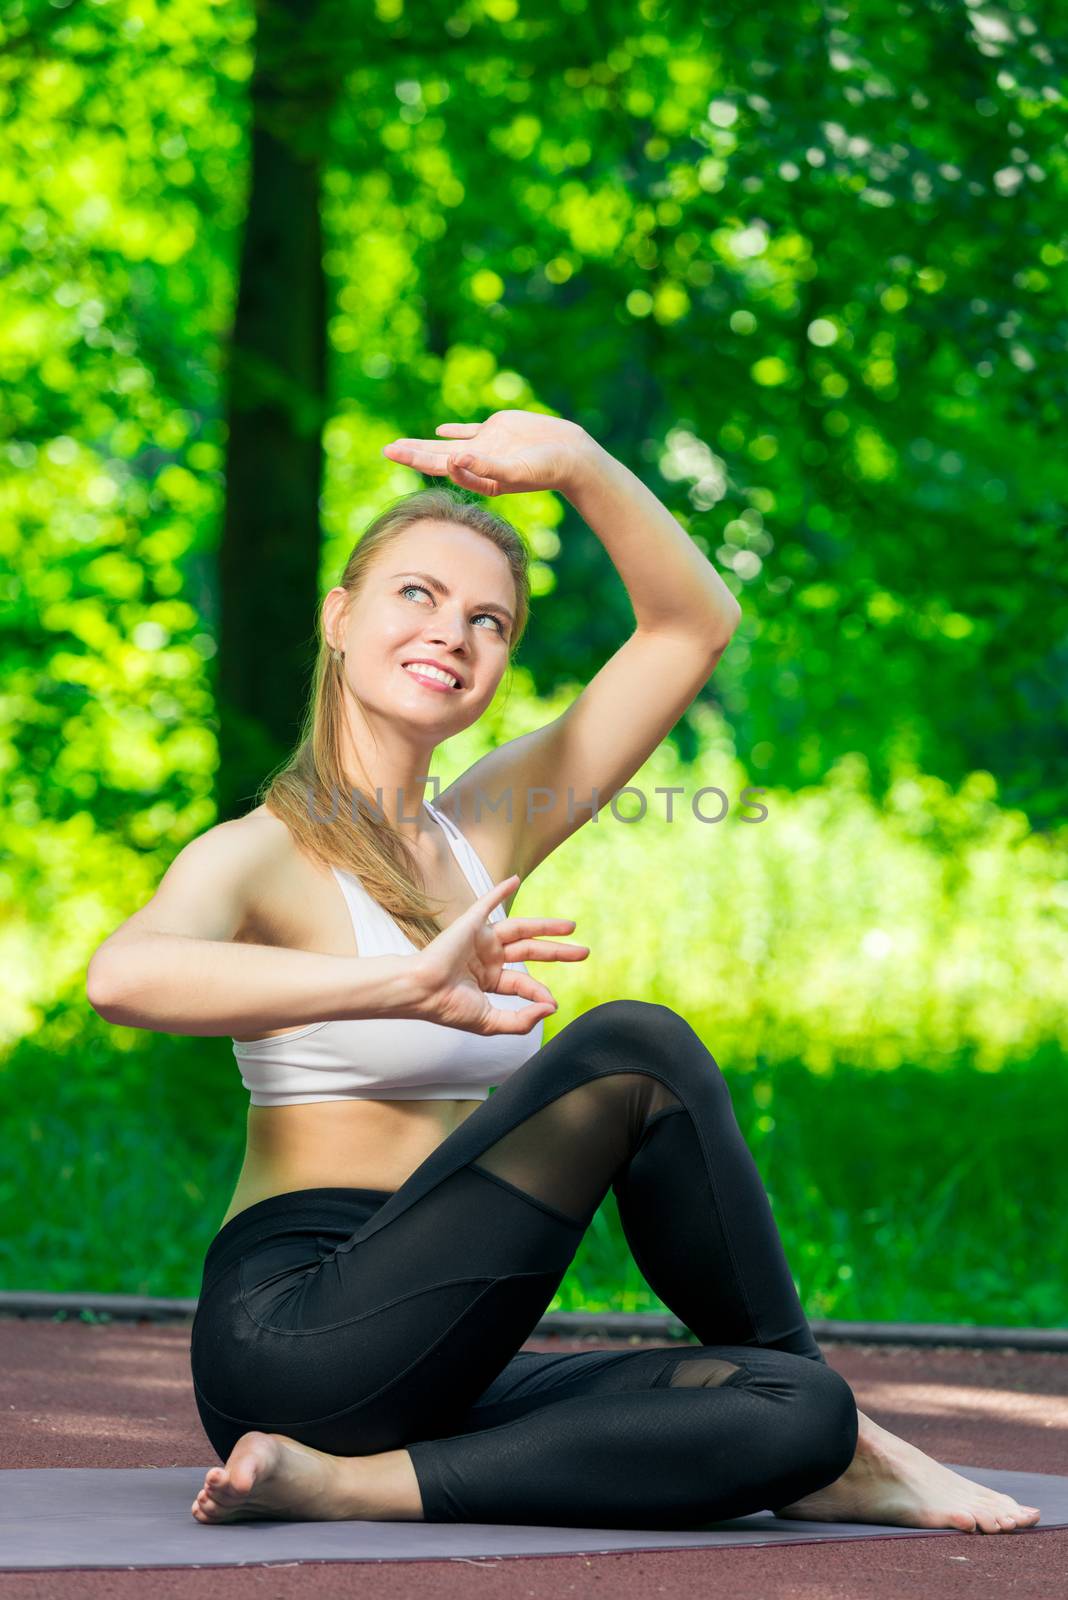 yoga asanas - pilates and yoga trainer performs exercises in the by kosmsos111